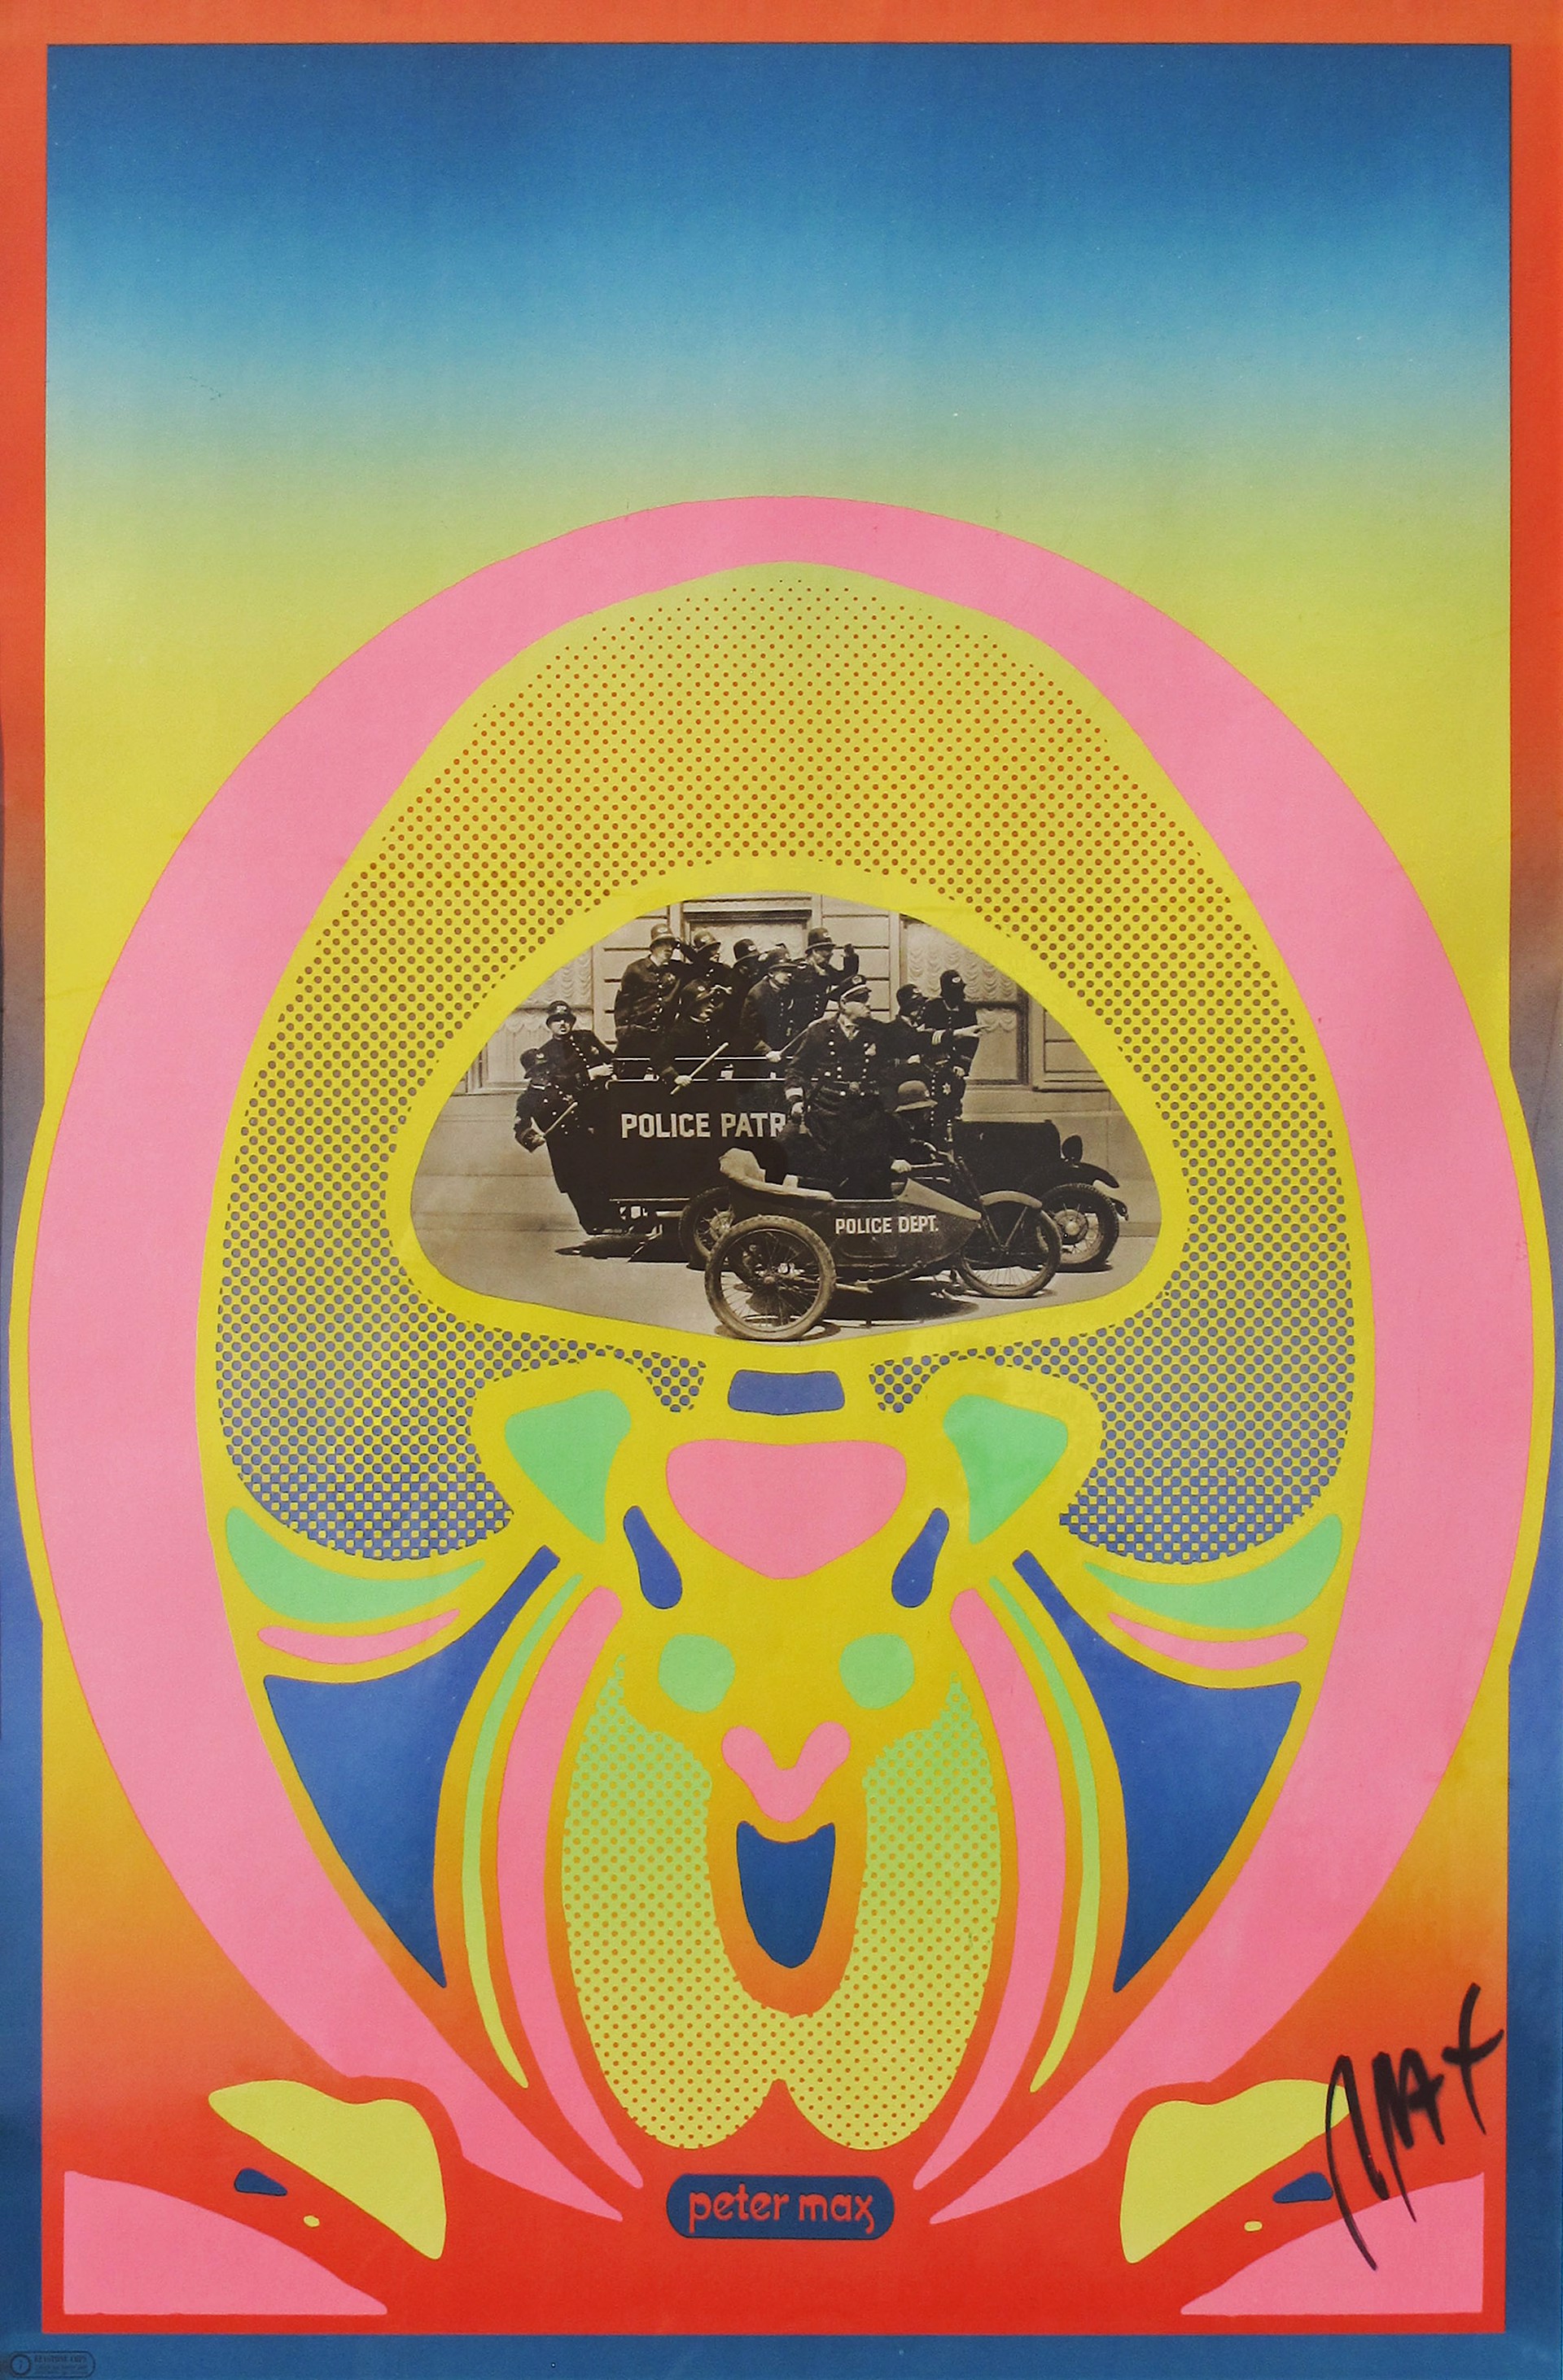 Keystone Cops by Peter Max